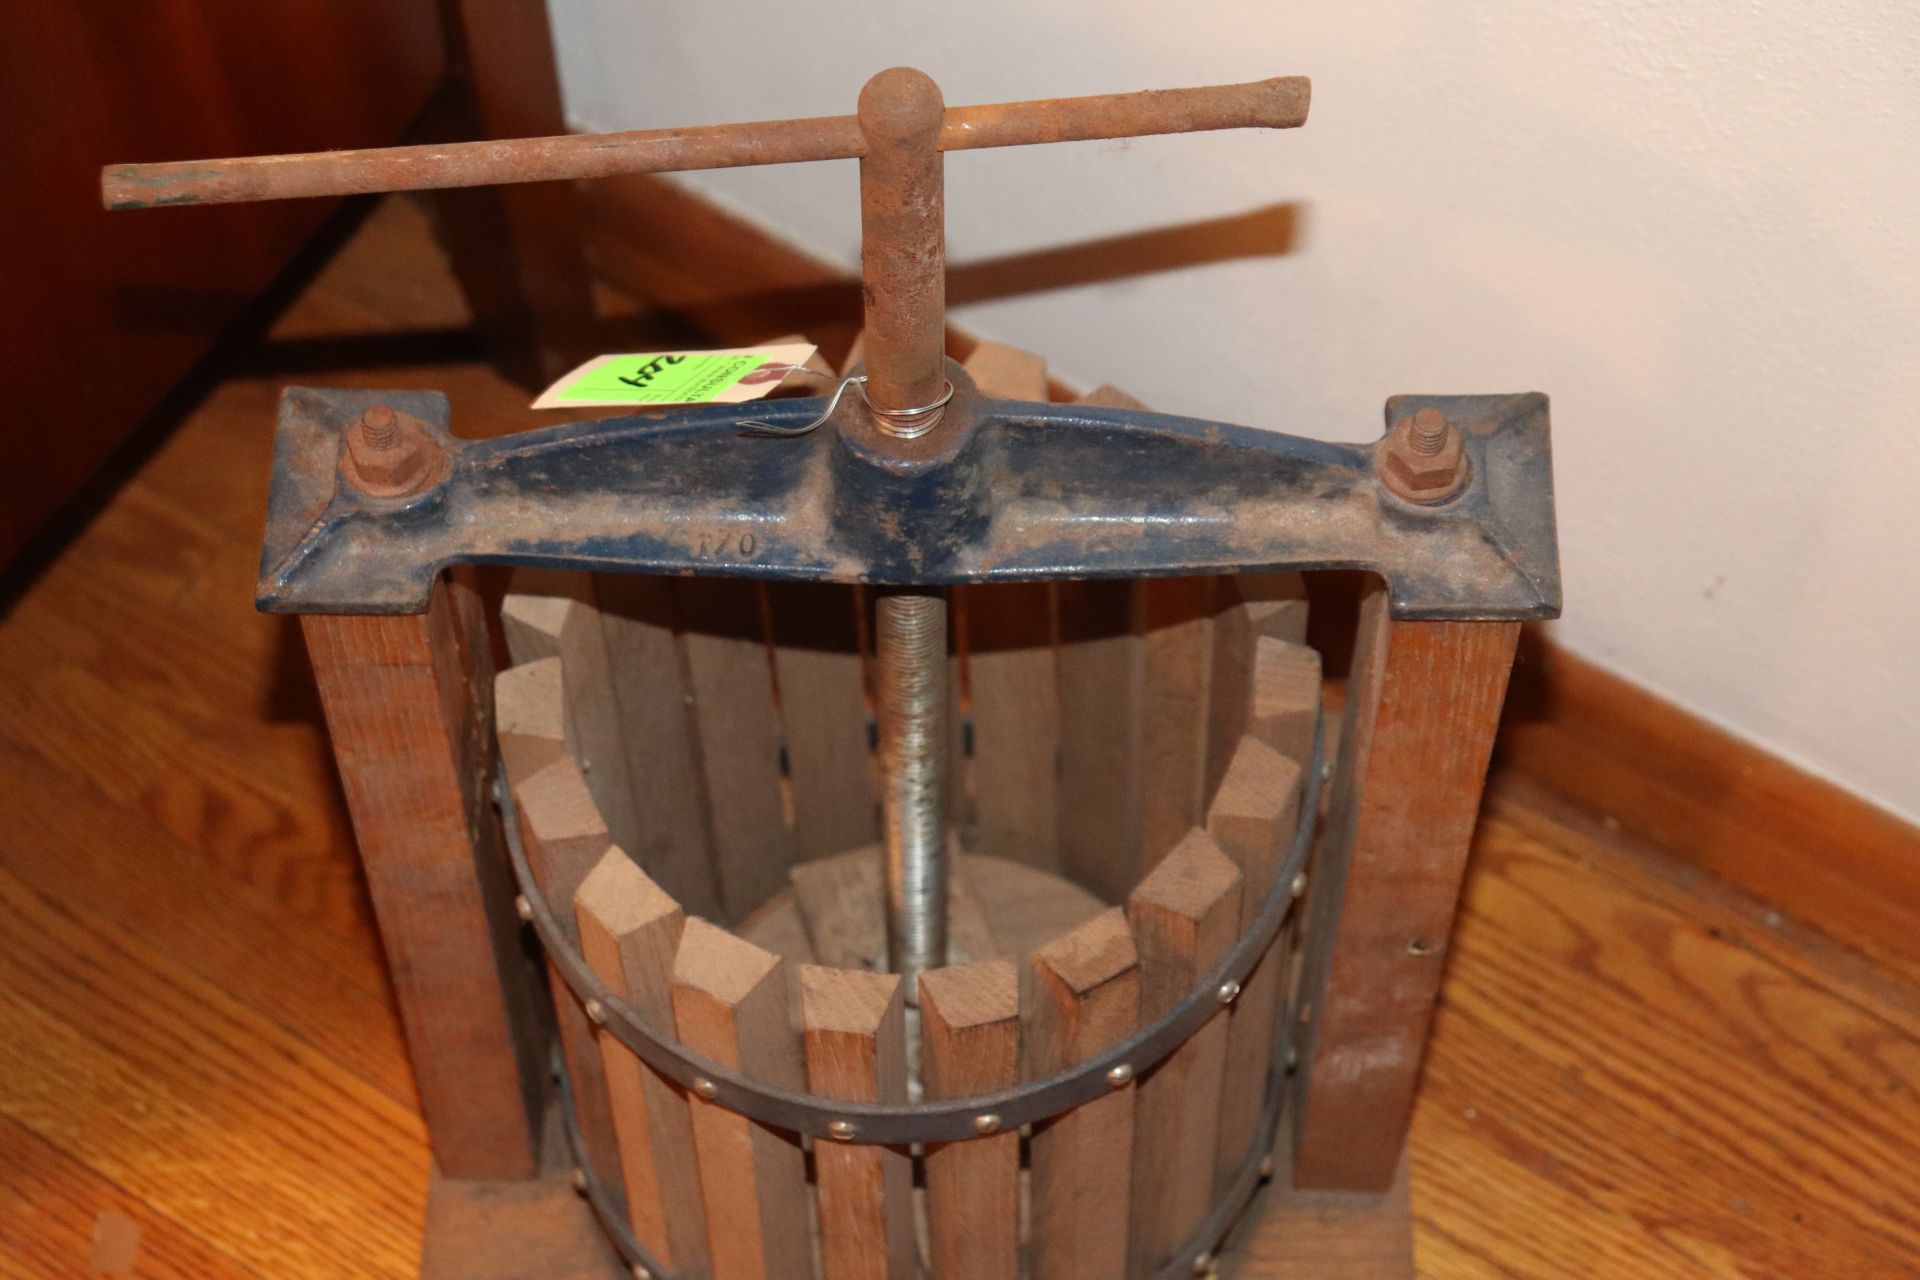 Wooden press, 20" x 14" - Image 2 of 2